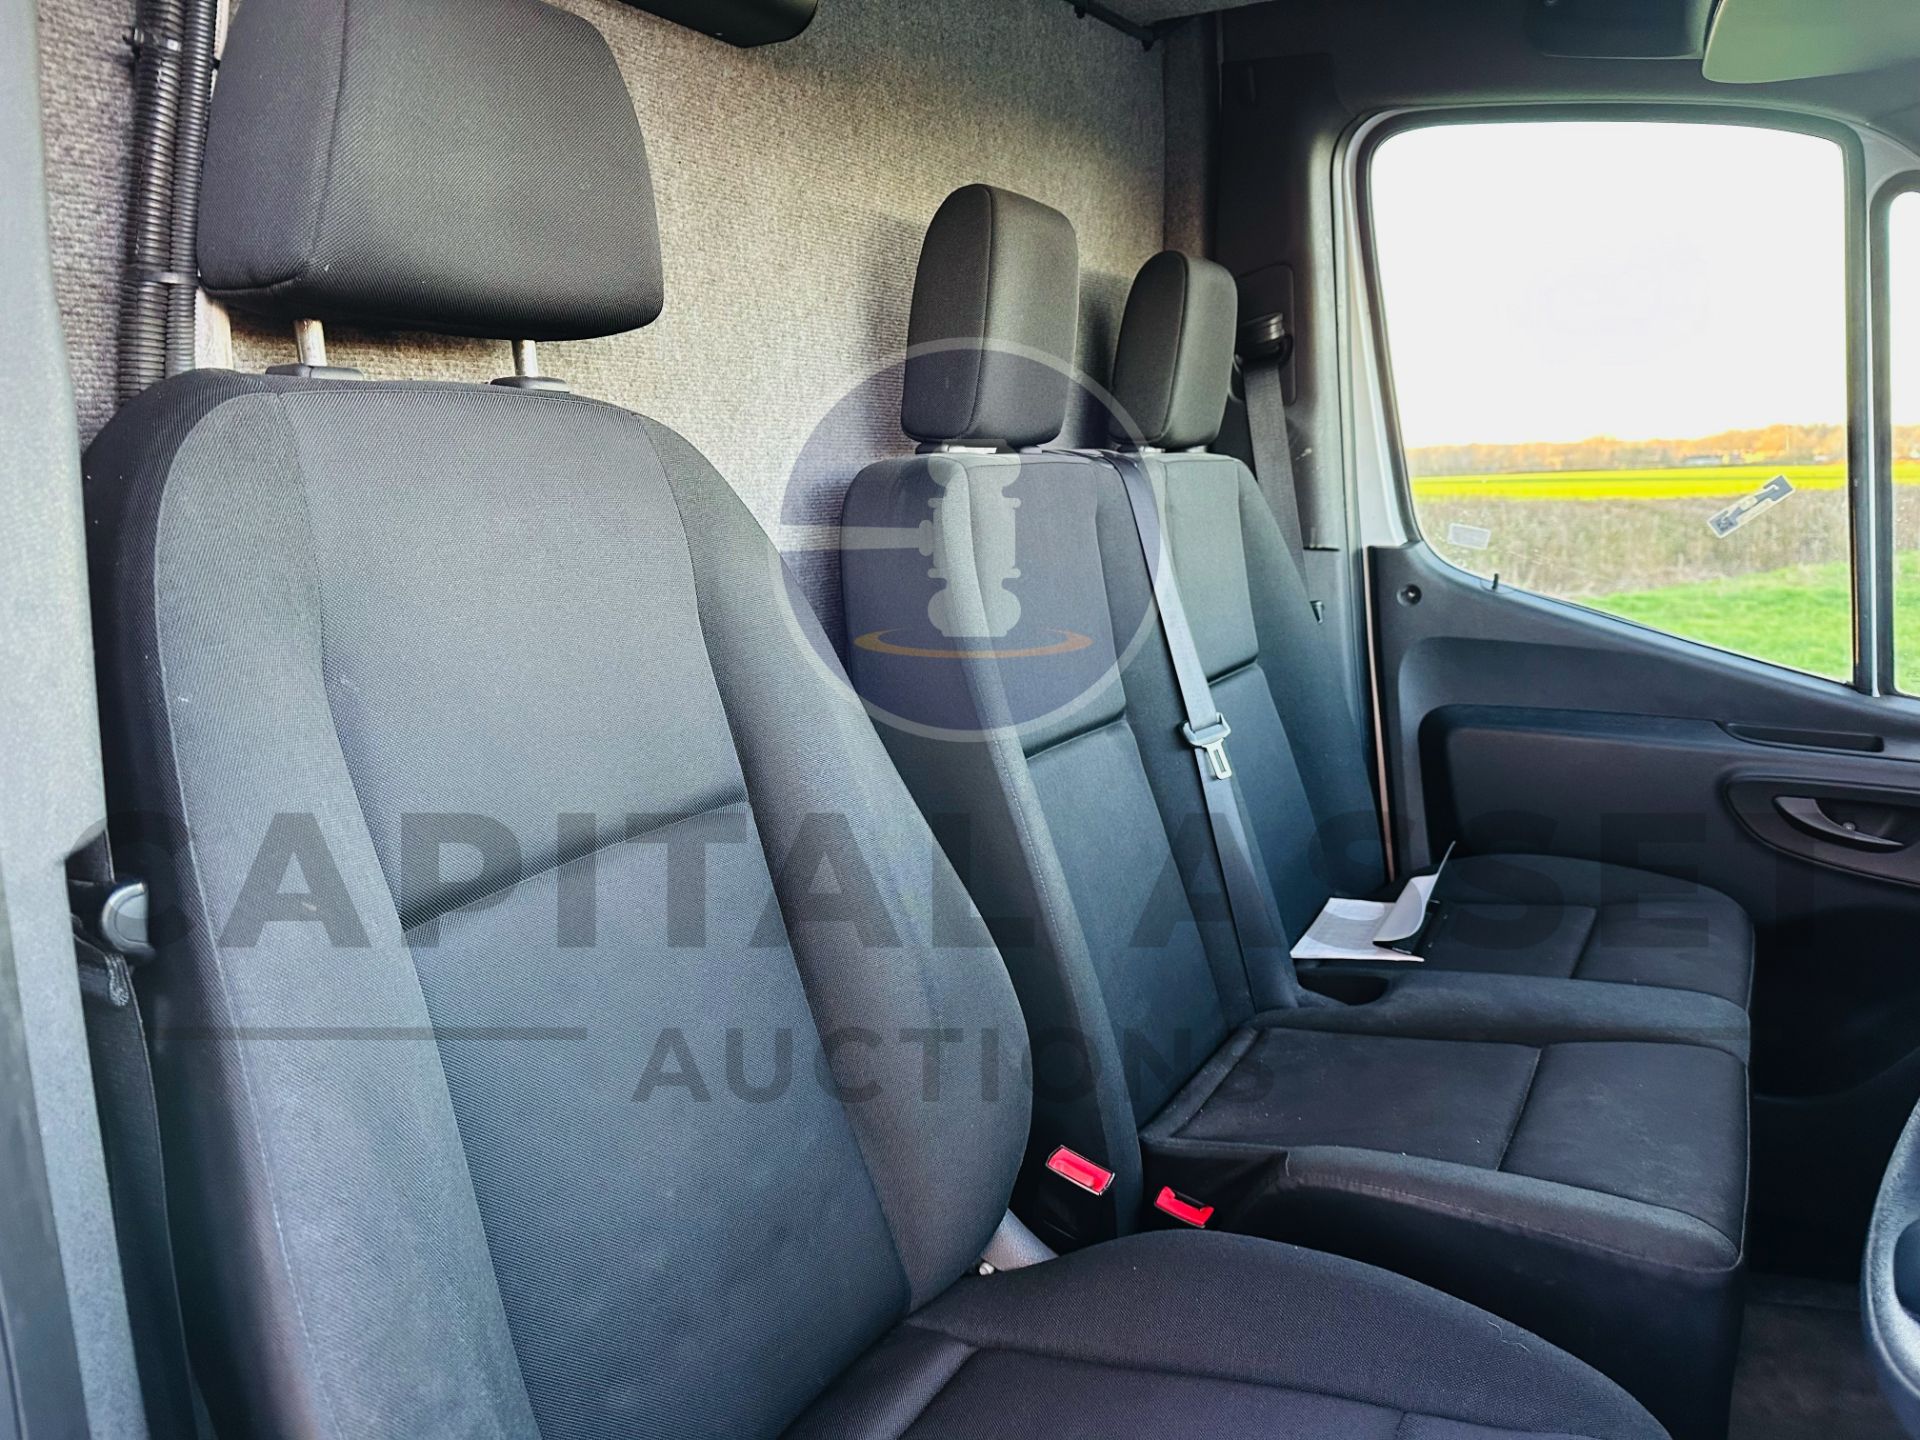 MERCEDES-BENZ SPRINTER 314 CDI *MWB - REFRIGERATED VAN* (2019 - FACELIFT MODEL) *OVERNIGHT STANDBY* - Image 21 of 32